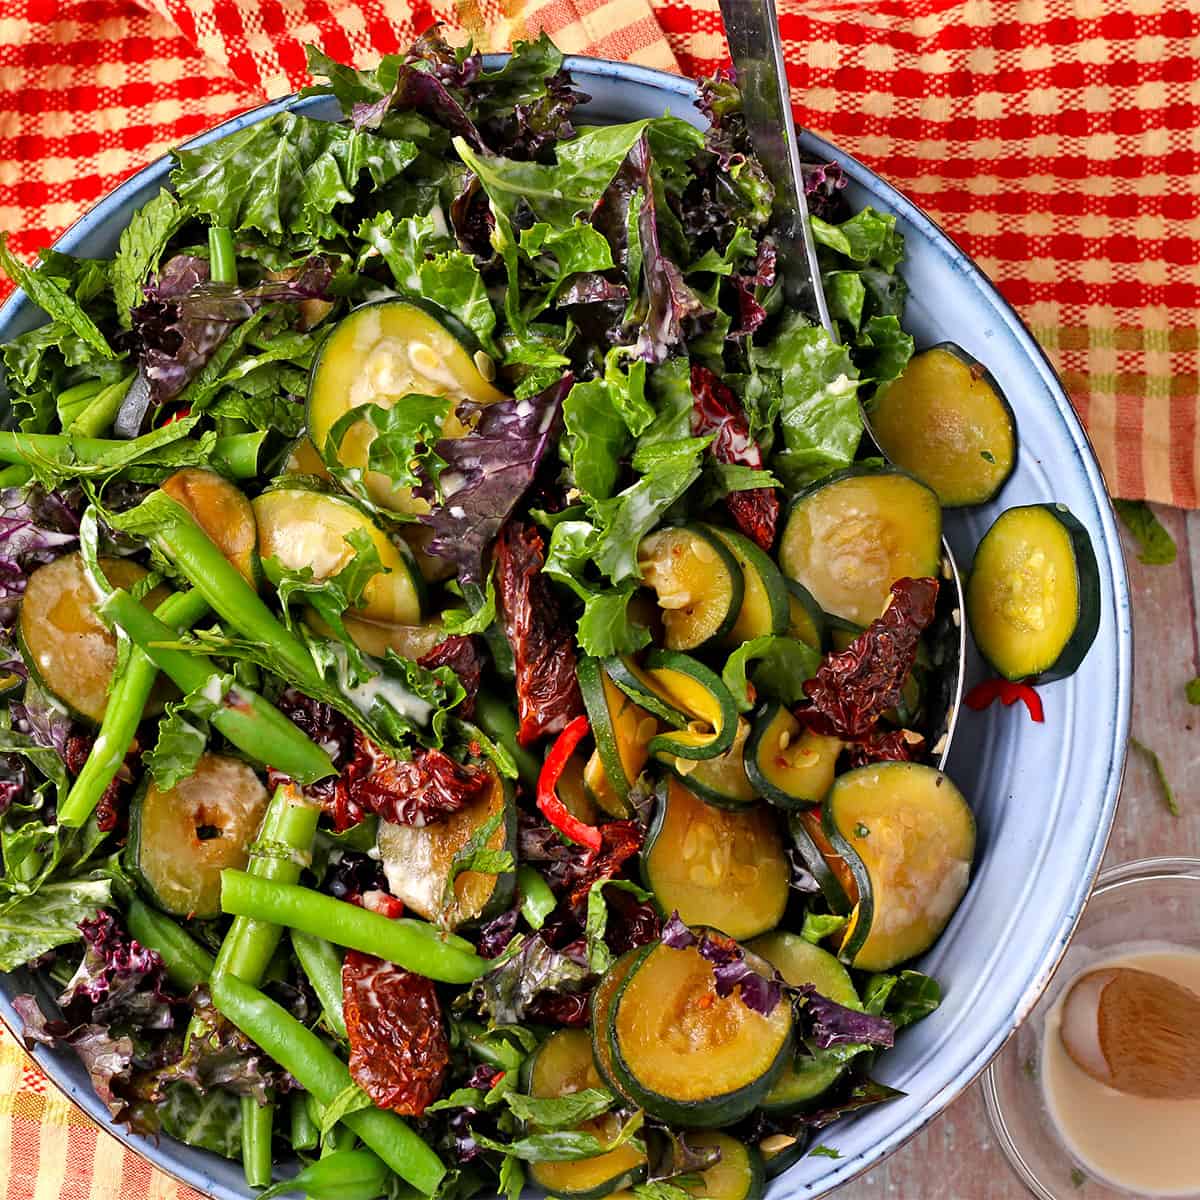 A salad with green beans, zucchini, sundried tomatoes and kale with tahini dressing.